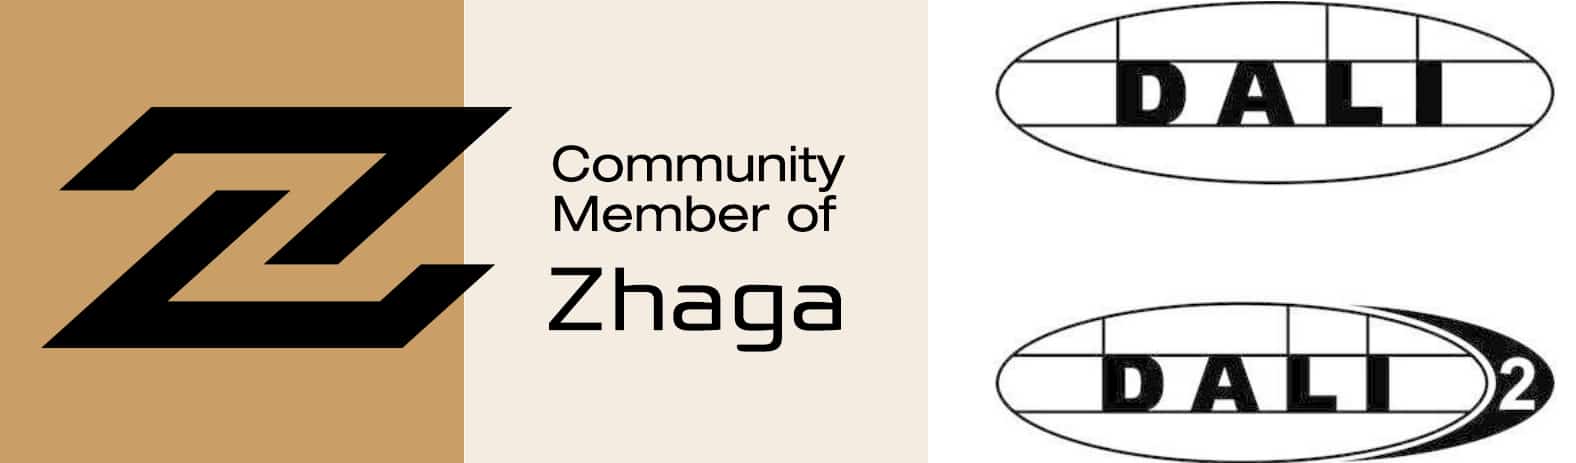 LIGMAN joins Zhaga and DiiA as Community Members